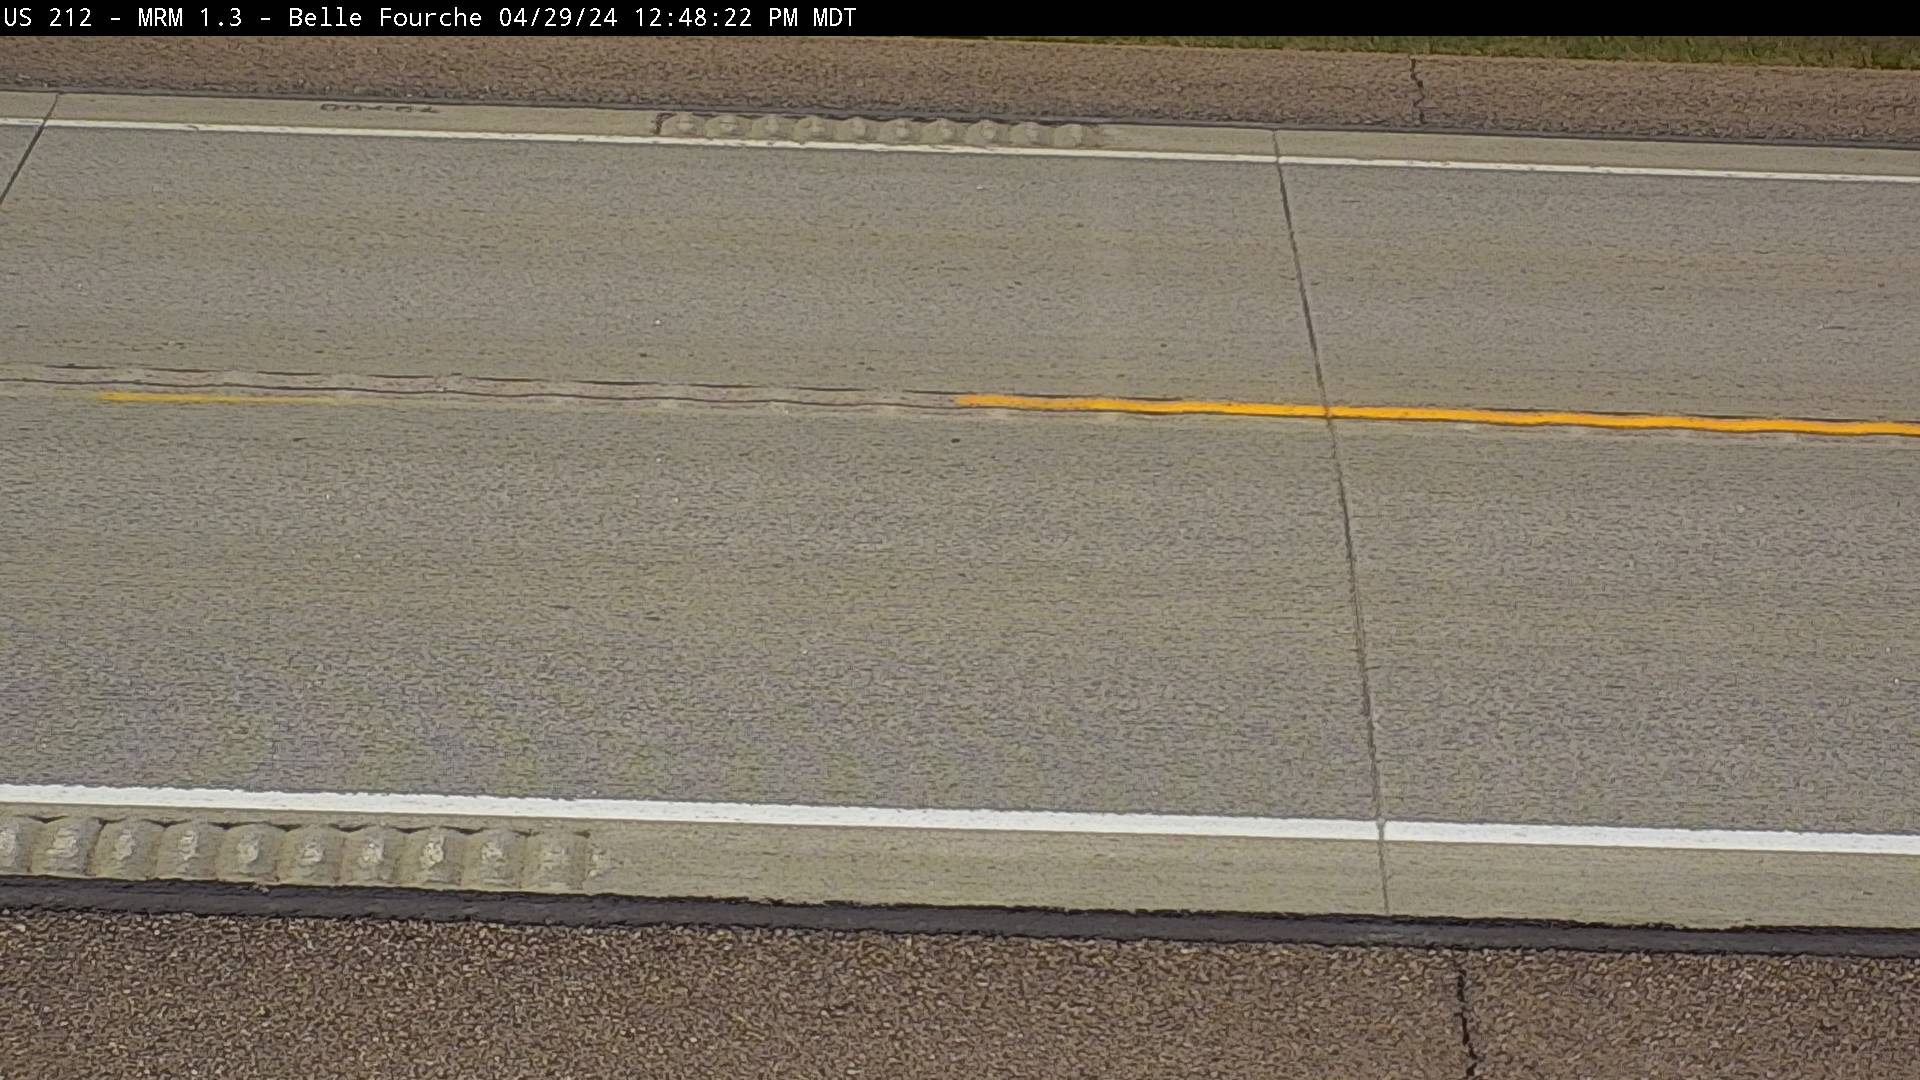 Northwest of town along US-212 @ MP 1.3 - South Traffic Camera